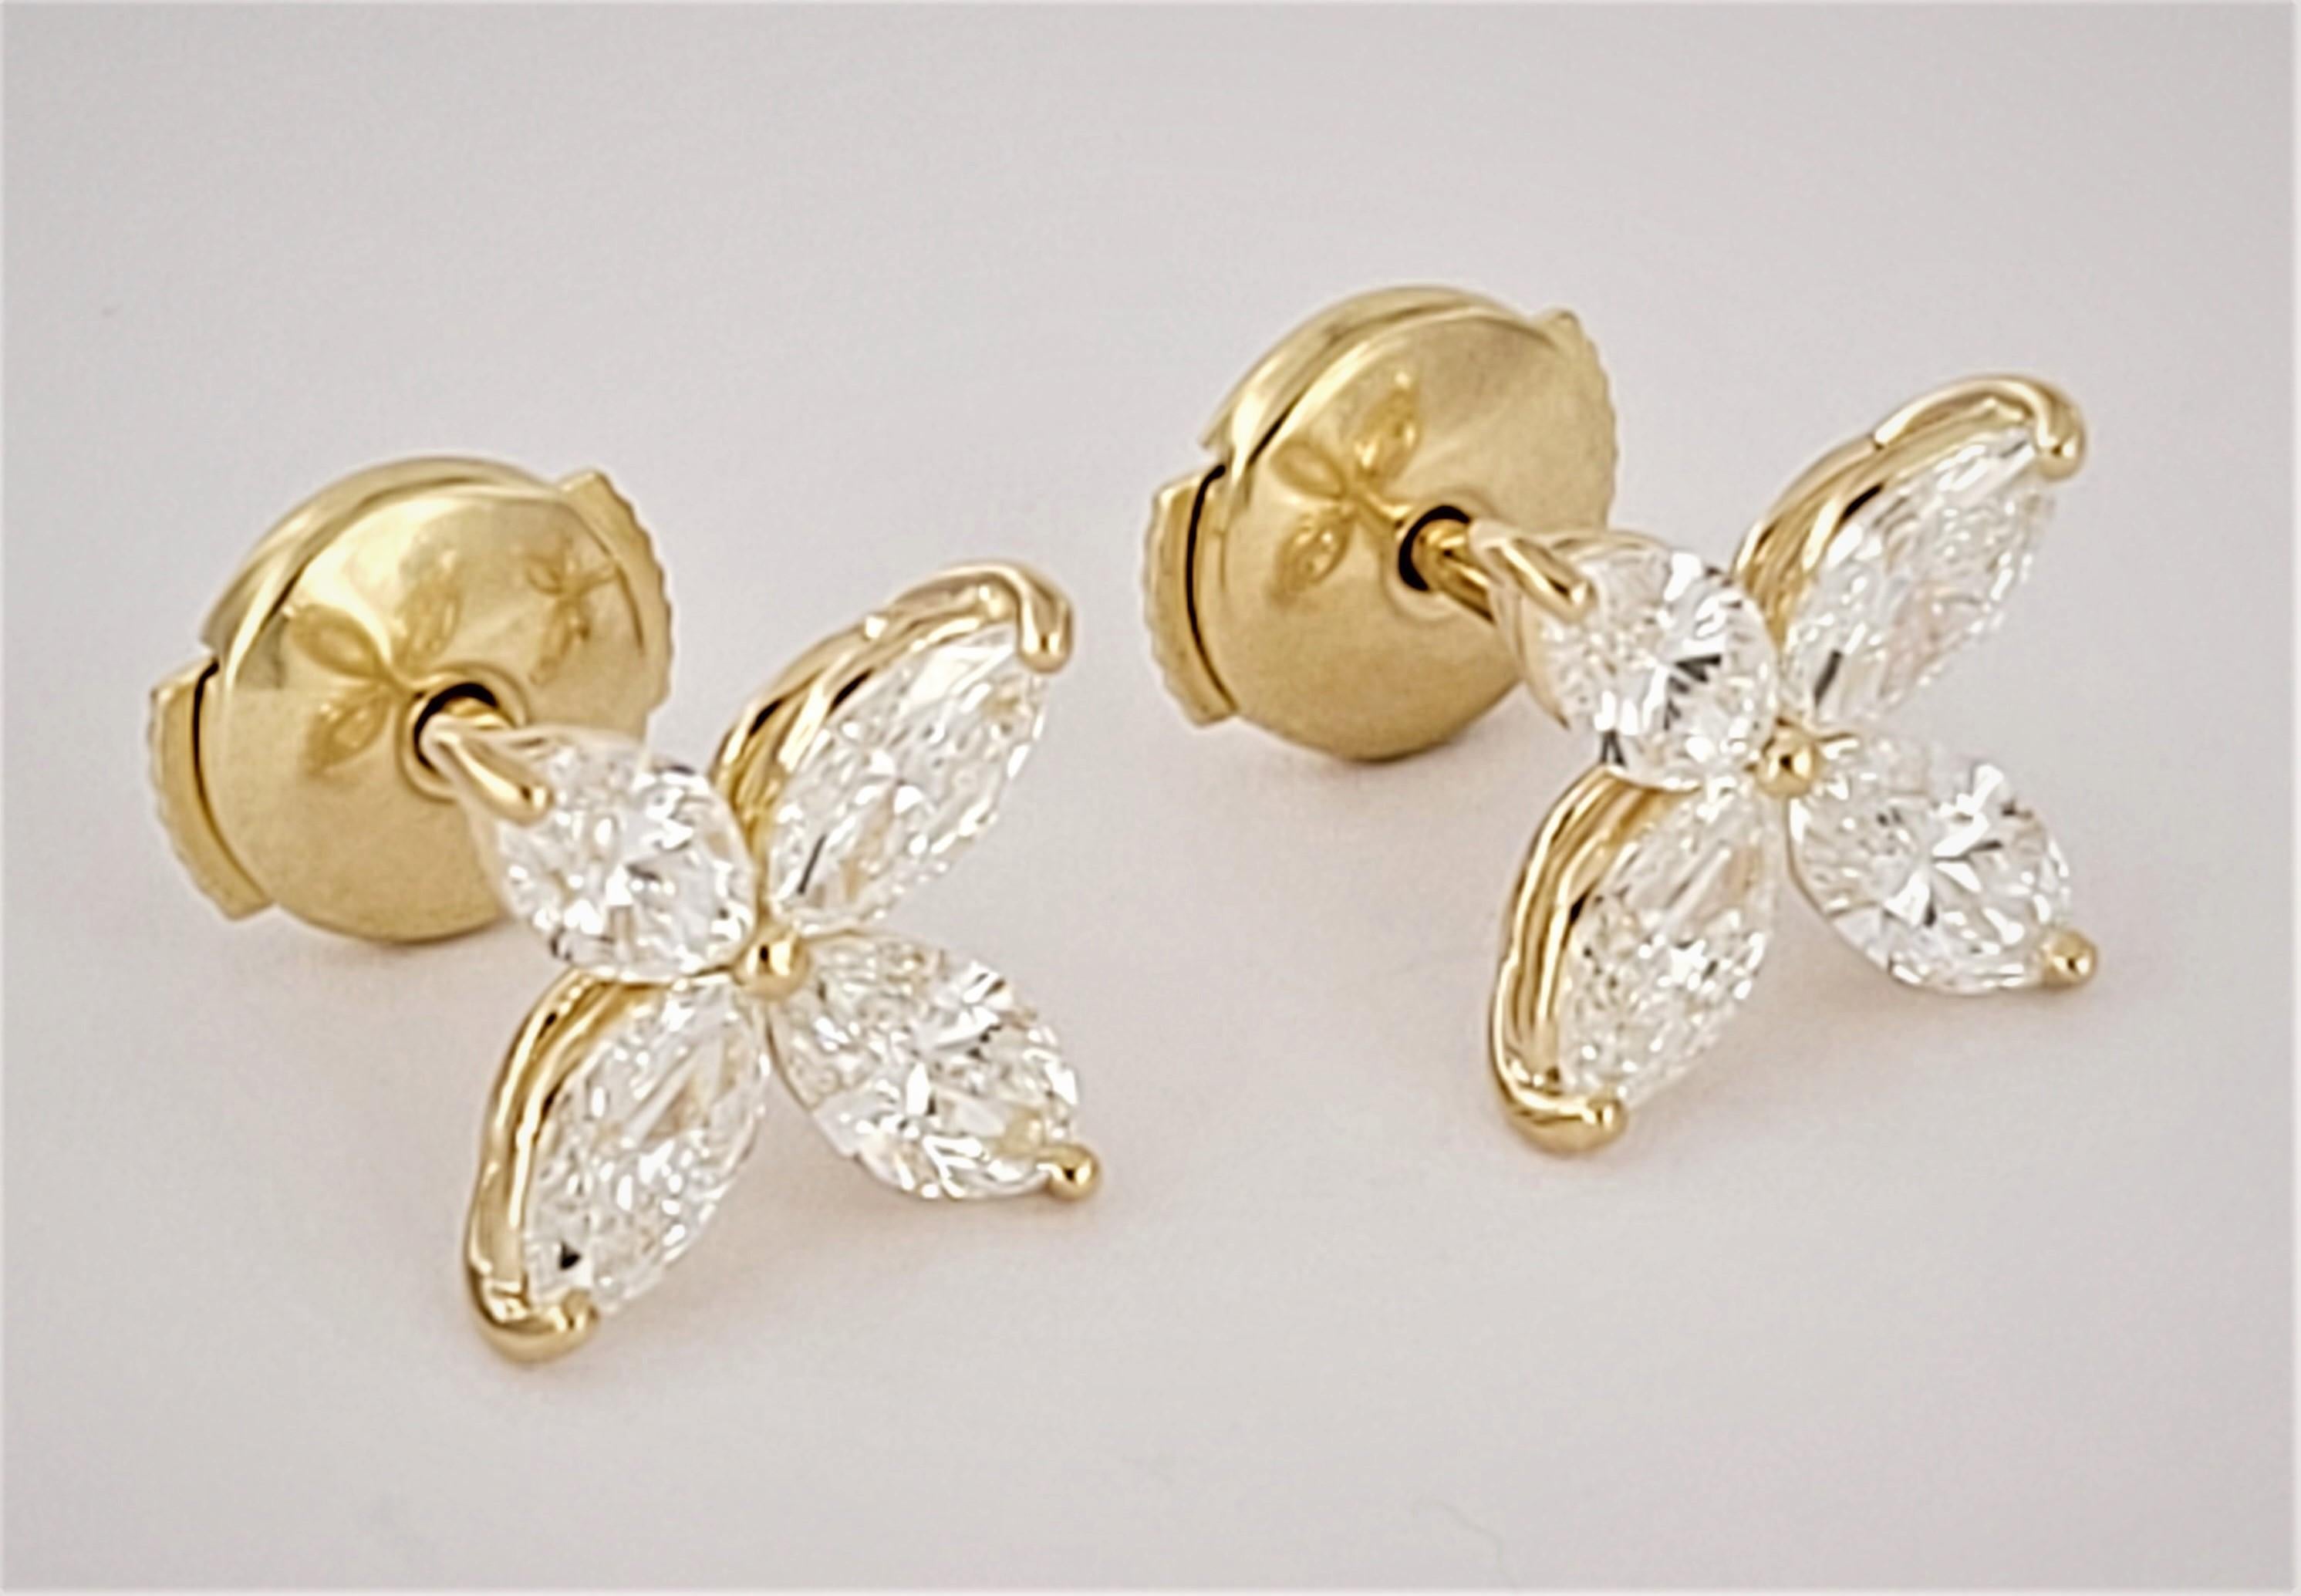 Tiffany Victoria Diamond Earrings in 18K Yellow Gold Medium In New Condition For Sale In New York, NY